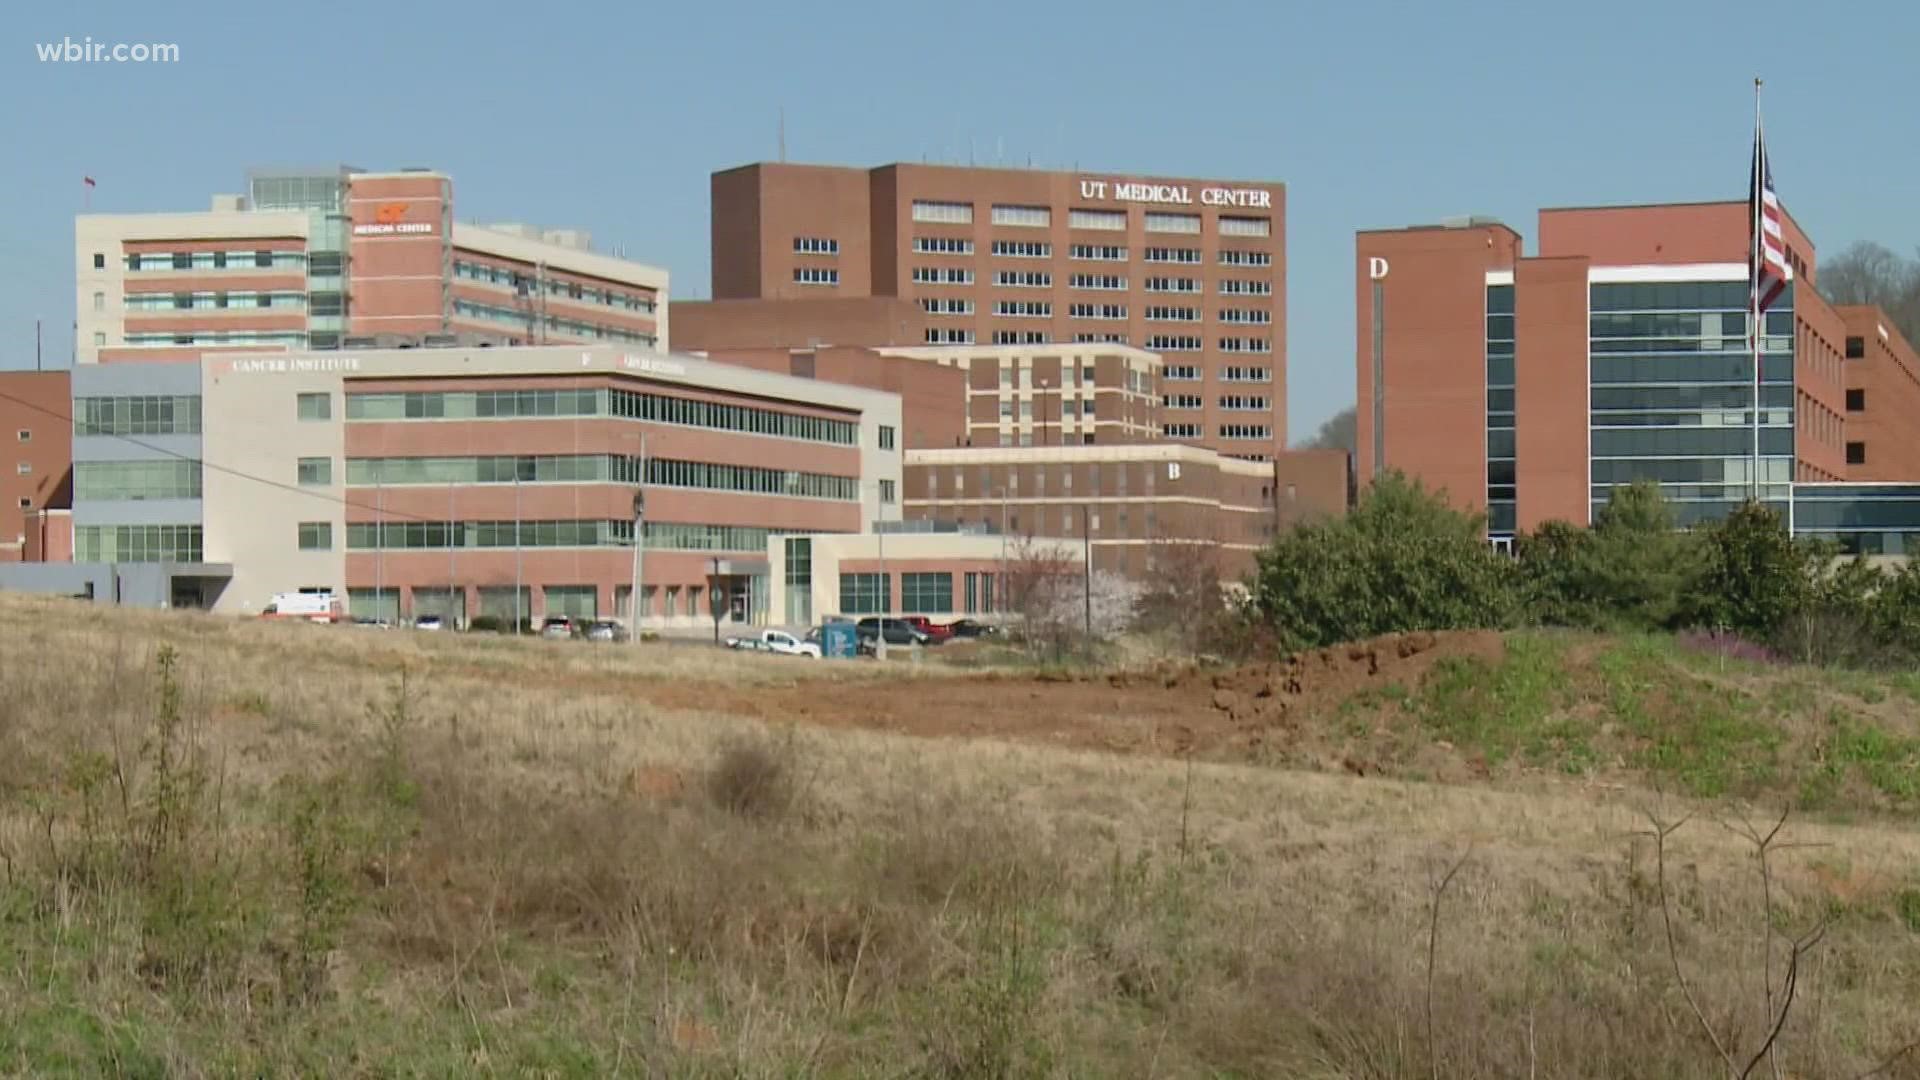 Both UTMC and Covenant Health say it's manageable for now, but if hospitalizations continue to grow -- elective surgeries could be scaled back again.